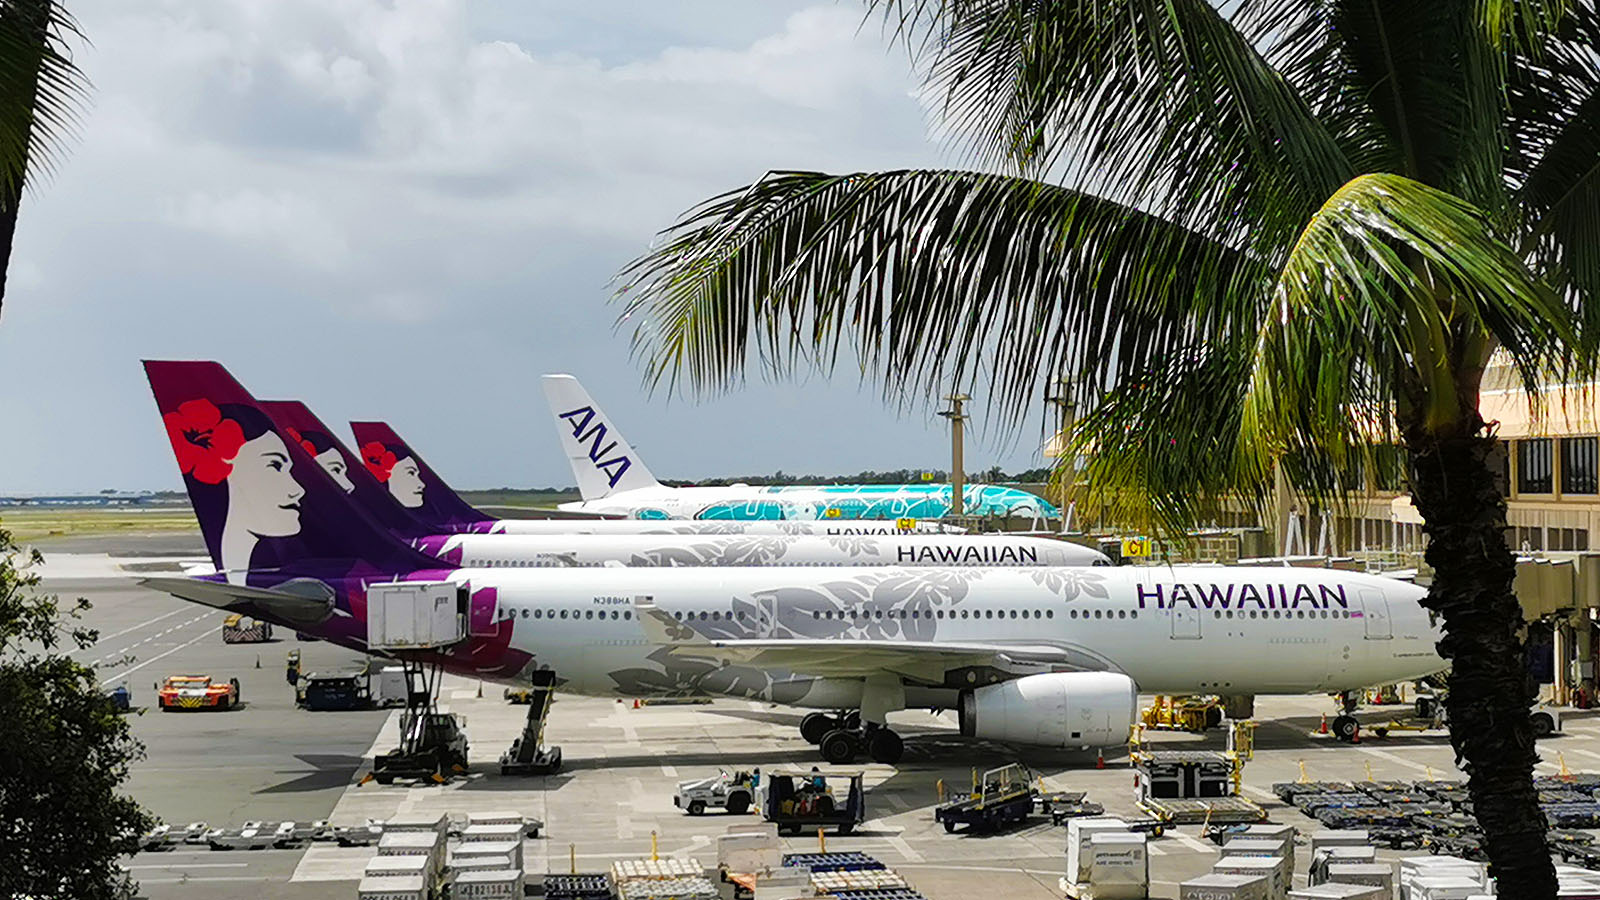 Plane parked at Honolulu Airport